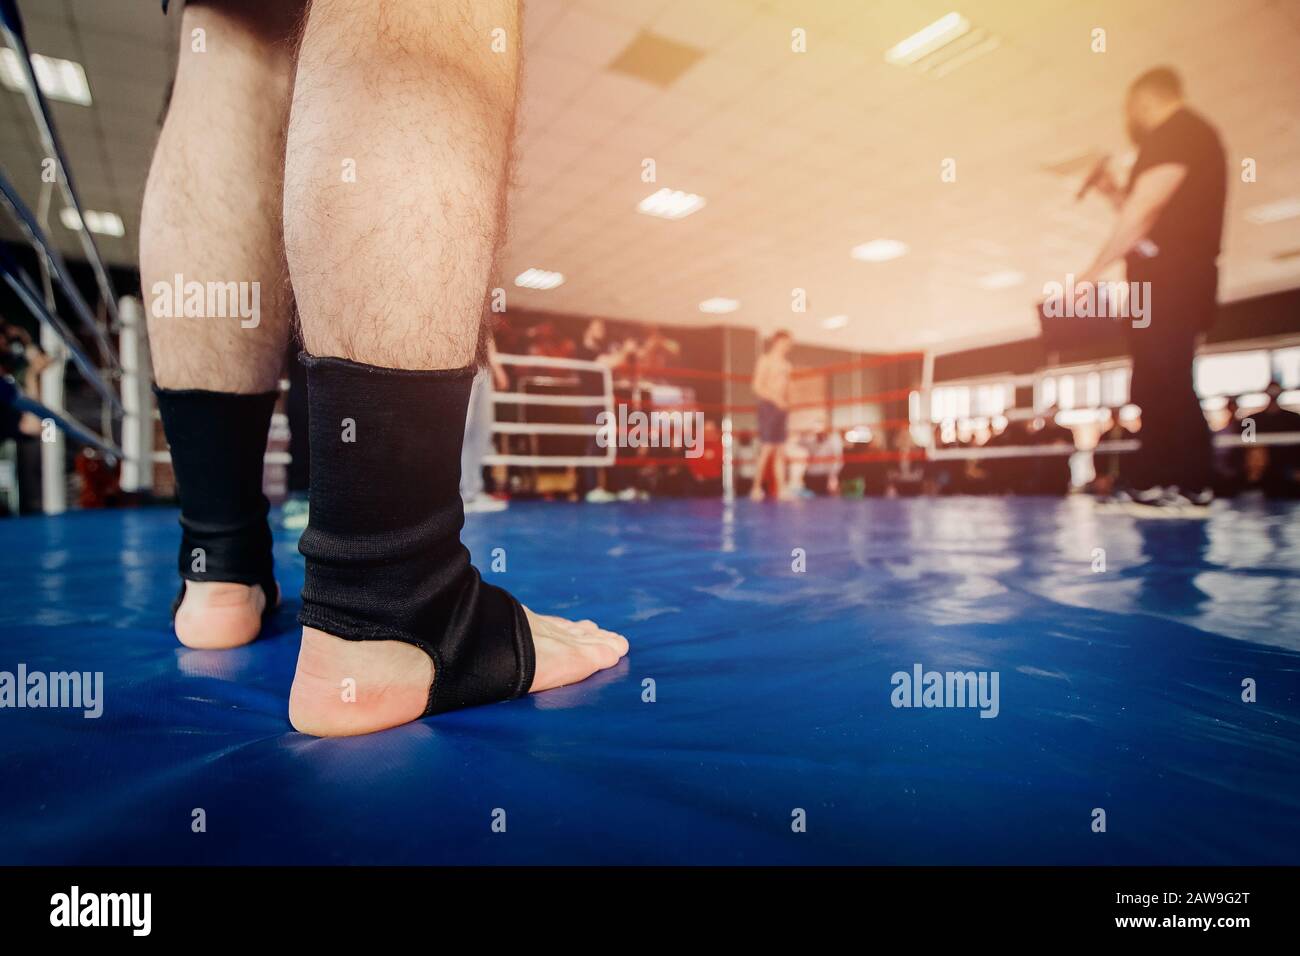 MMA fighter prepares to fight in ring, close-up legs in socks Stock Photo -  Alamy